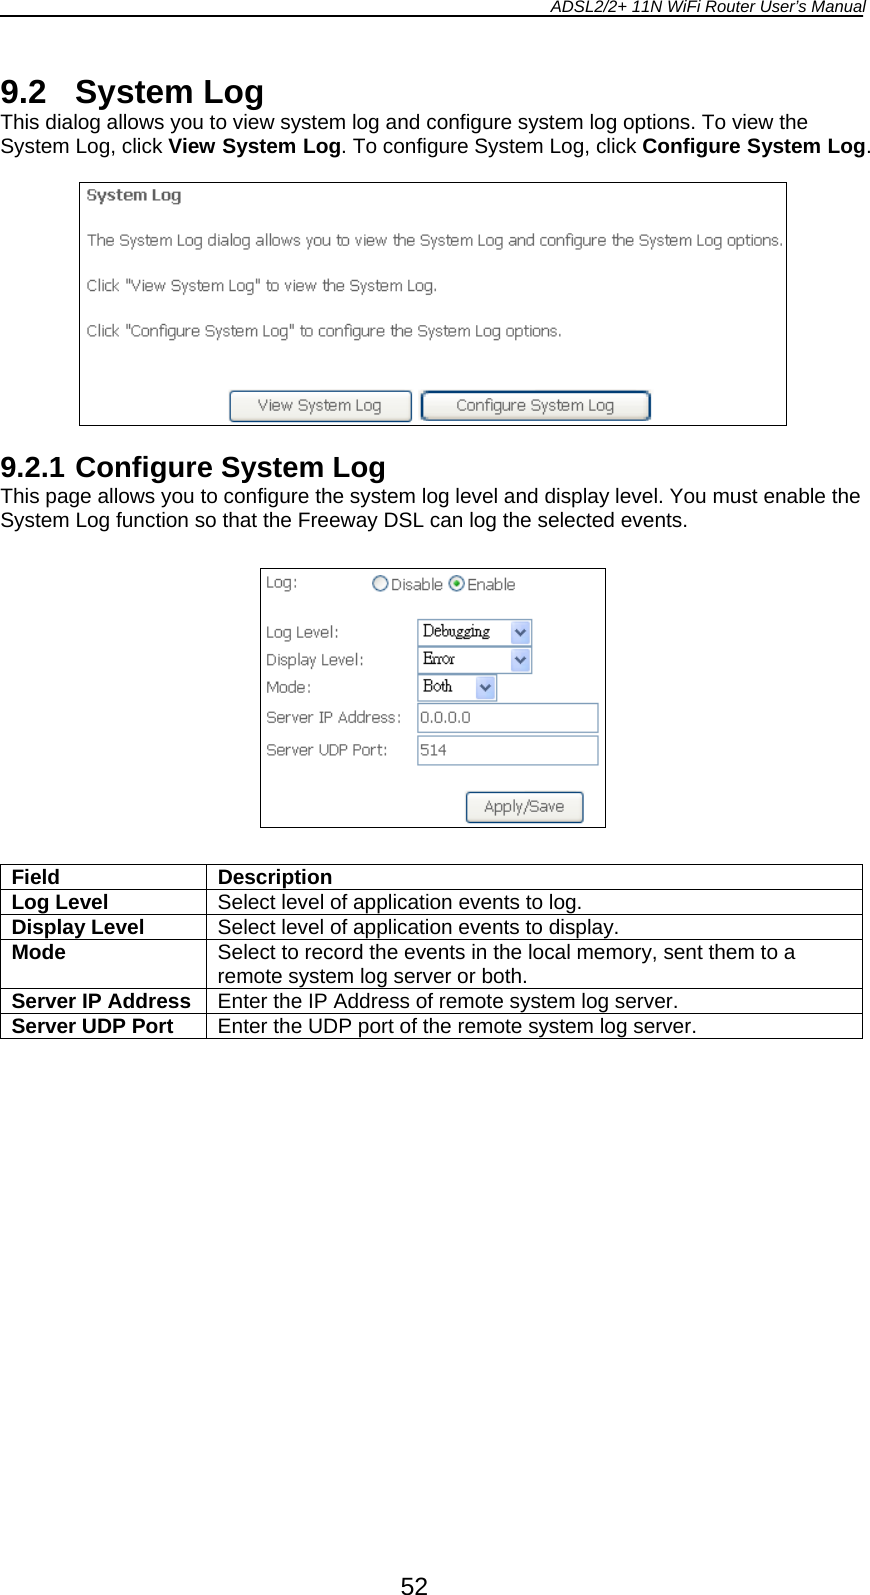 ADSL2/2+ 11N WiFi Router User’s Manual  52 9.2 System Log This dialog allows you to view system log and configure system log options. To view the System Log, click View System Log. To configure System Log, click Configure System Log.    9.2.1 Configure System Log This page allows you to configure the system log level and display level. You must enable the System Log function so that the Freeway DSL can log the selected events.    Field Description Log Level  Select level of application events to log. Display Level  Select level of application events to display. Mode  Select to record the events in the local memory, sent them to a remote system log server or both. Server IP Address Enter the IP Address of remote system log server. Server UDP Port  Enter the UDP port of the remote system log server.  